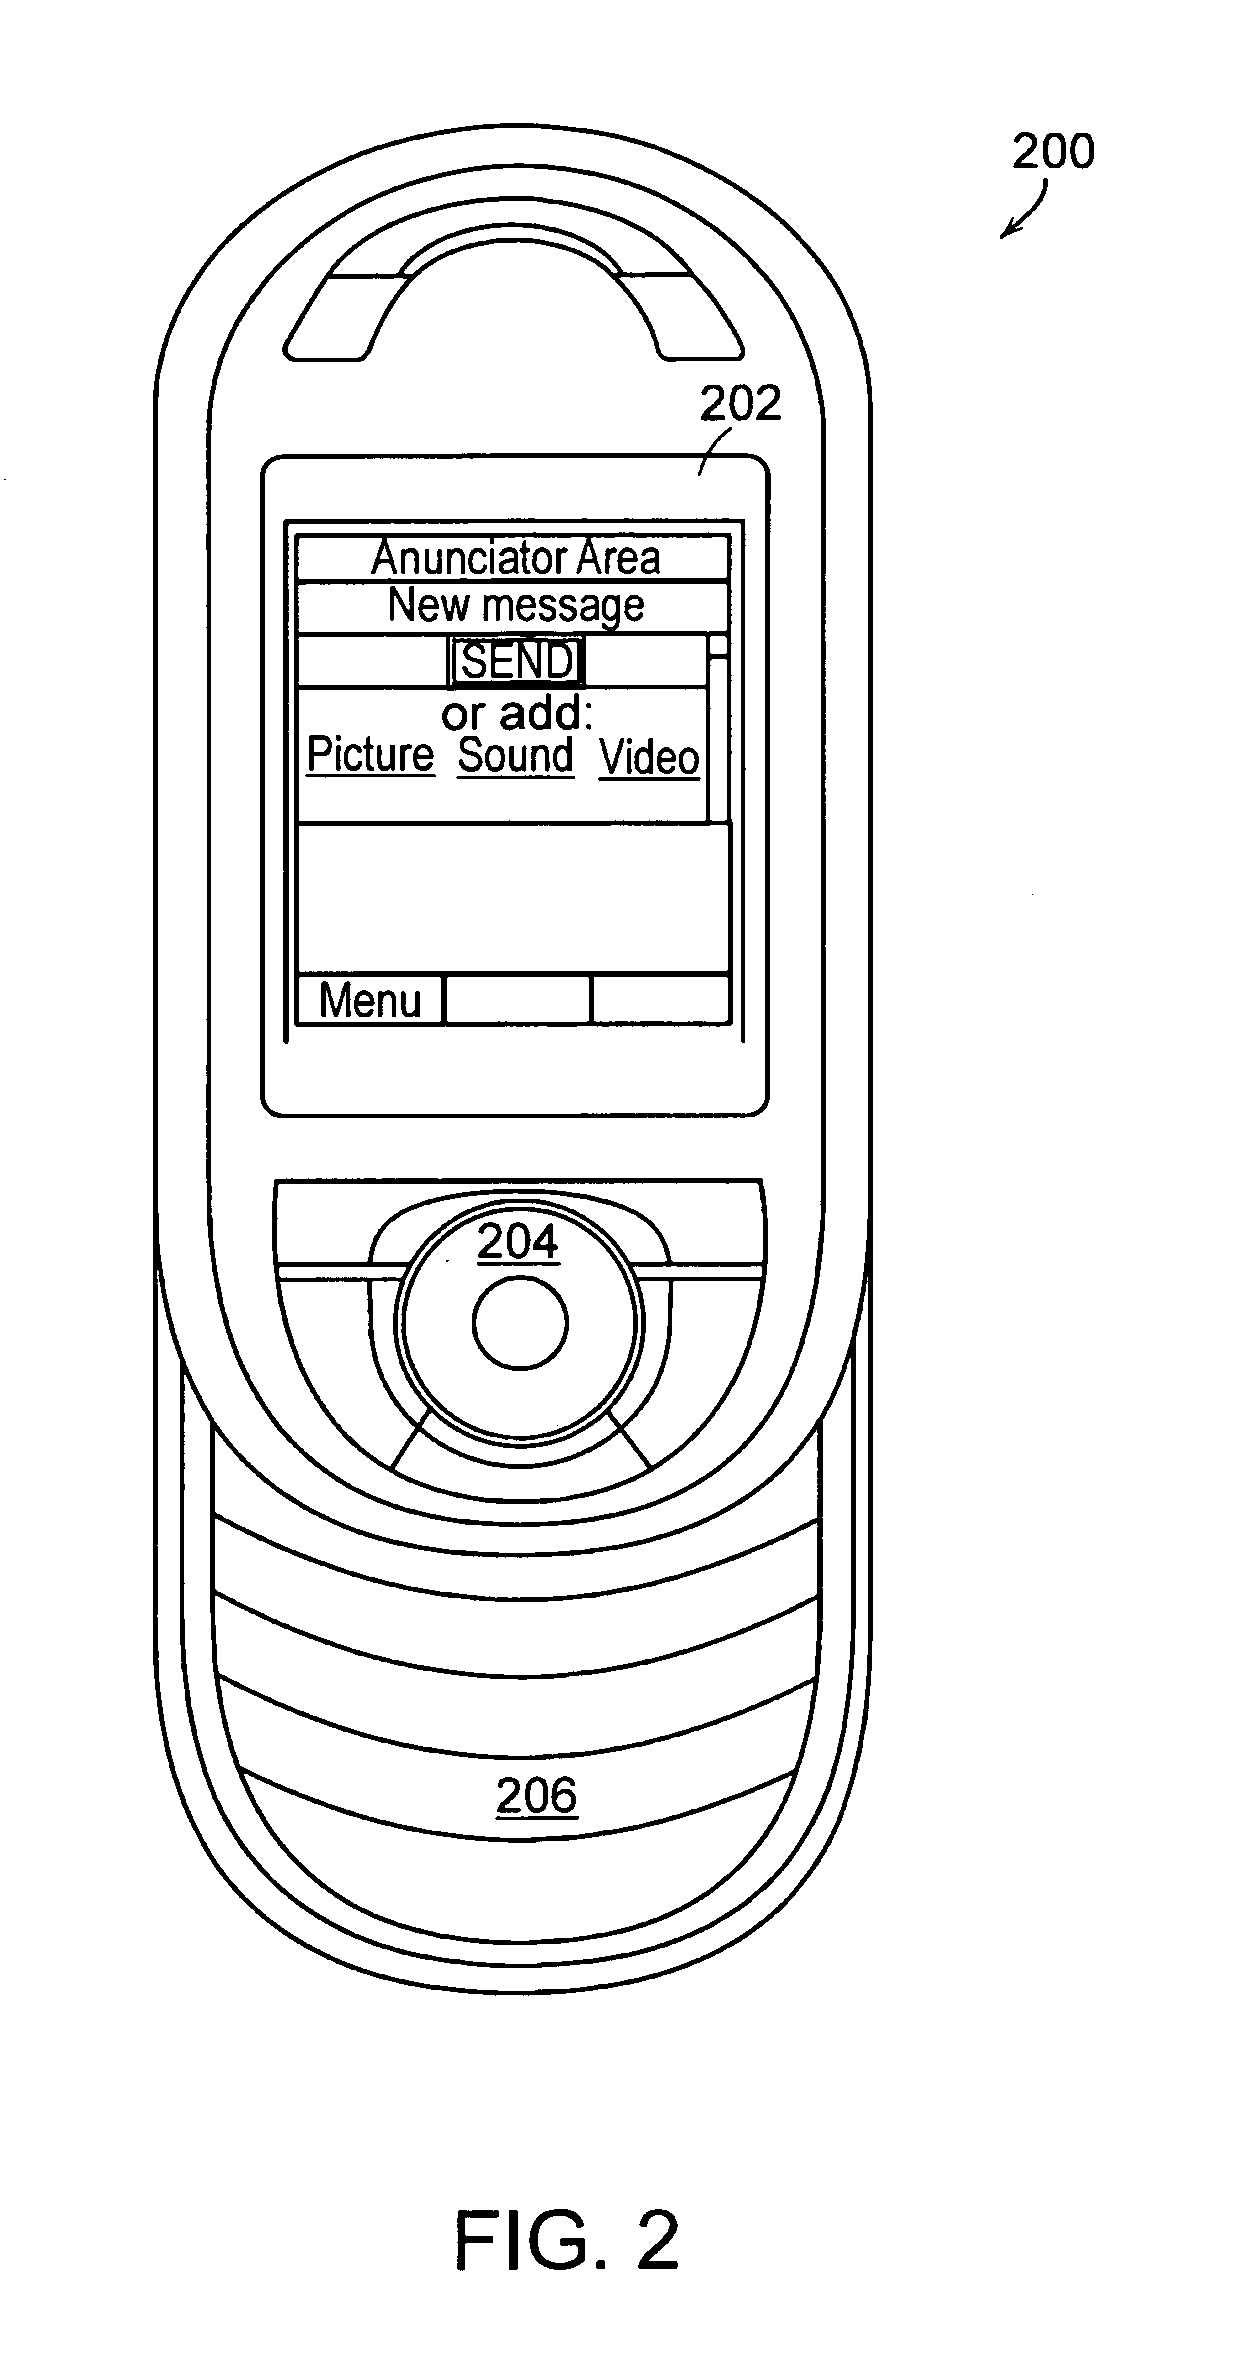 Location-based text messaging